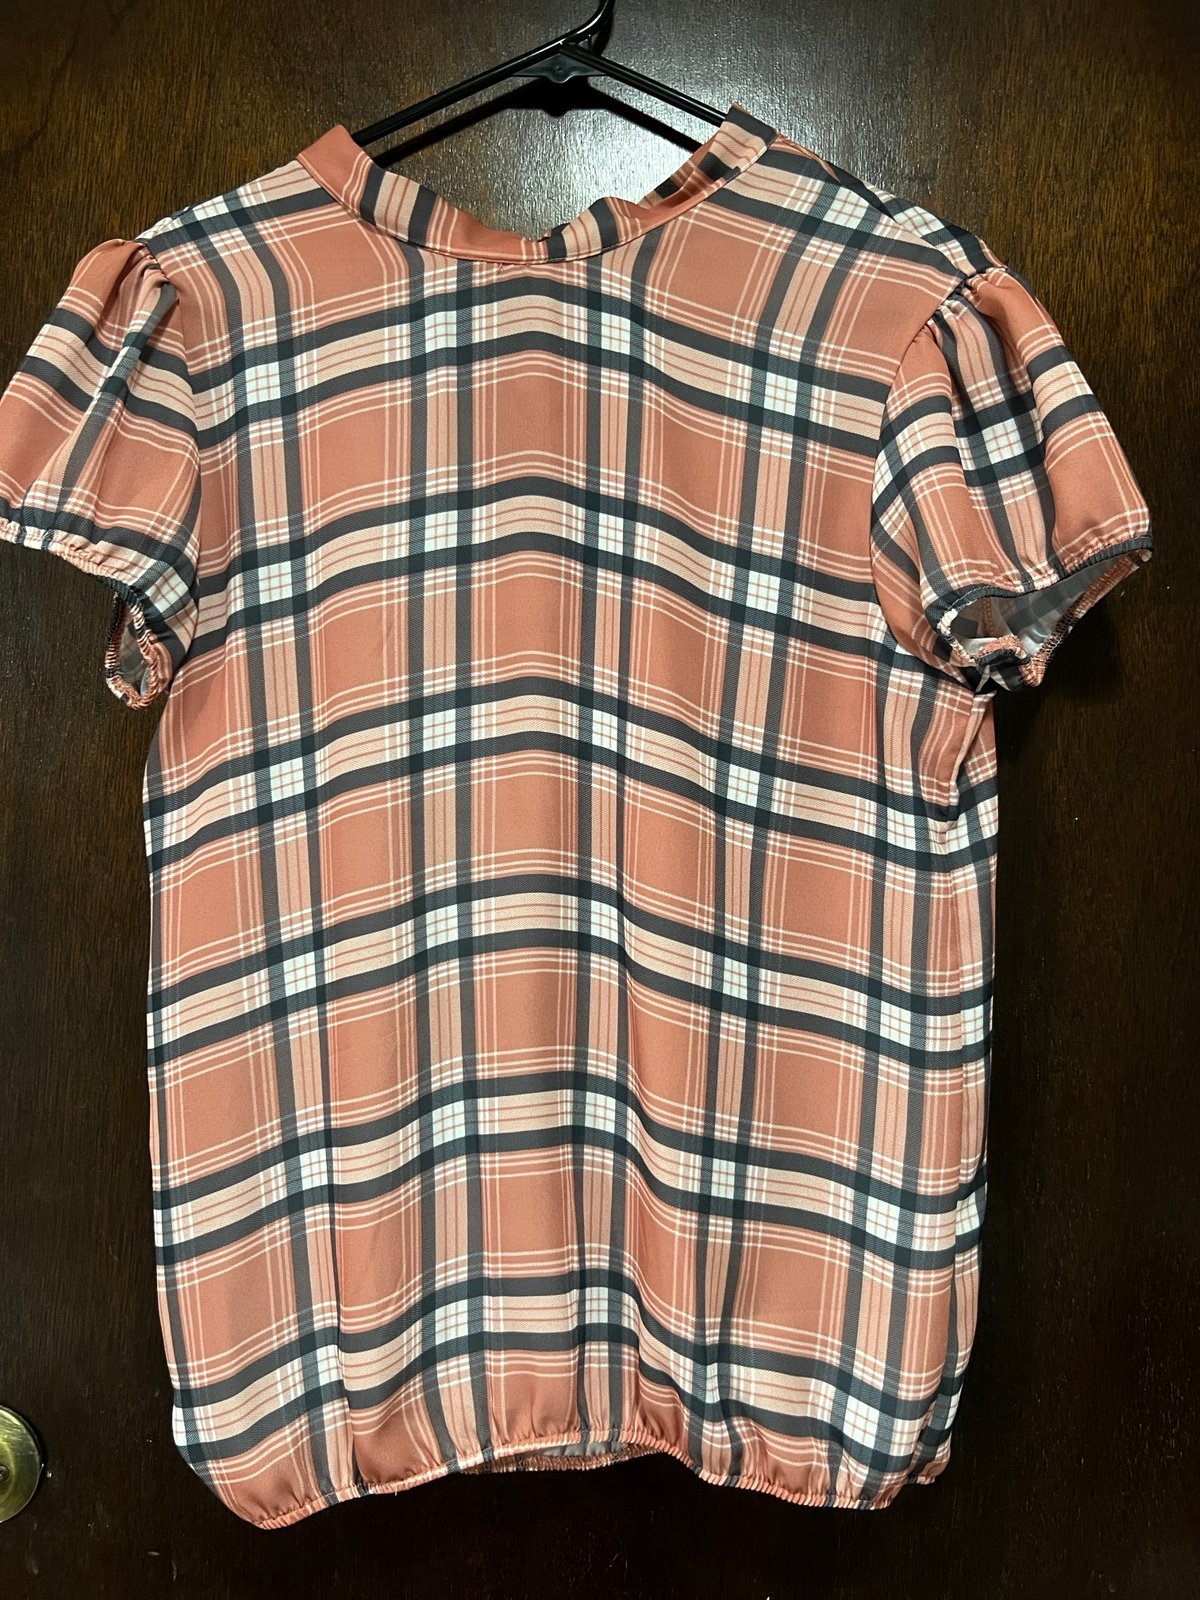 Perfect Plaid Top NY & CO Size Small Hm79exXOV Outlet S